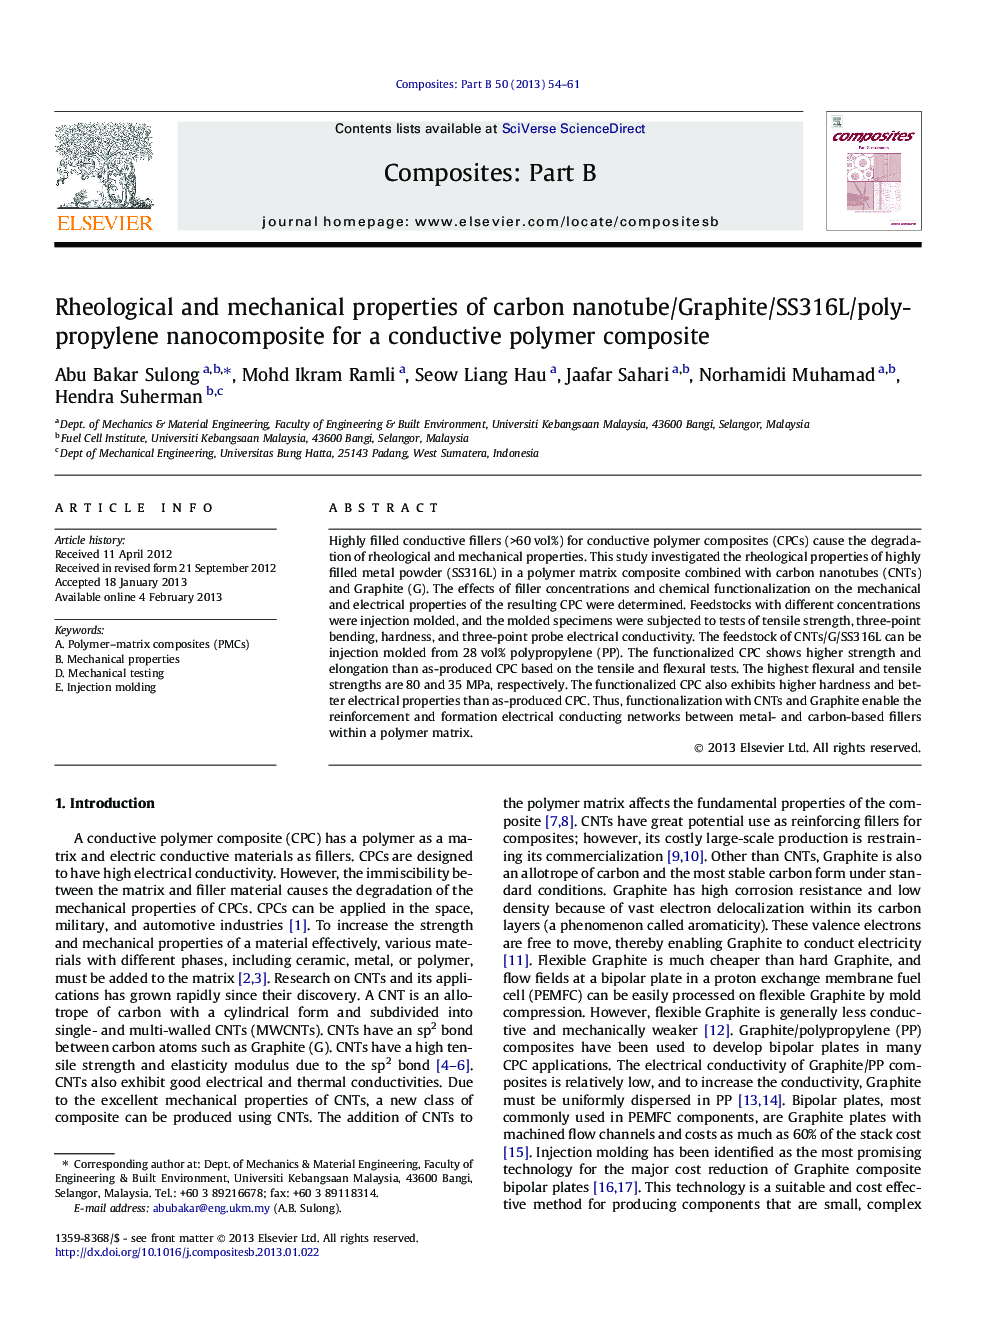 Rheological and mechanical properties of carbon nanotube/Graphite/SS316L/polypropylene nanocomposite for a conductive polymer composite